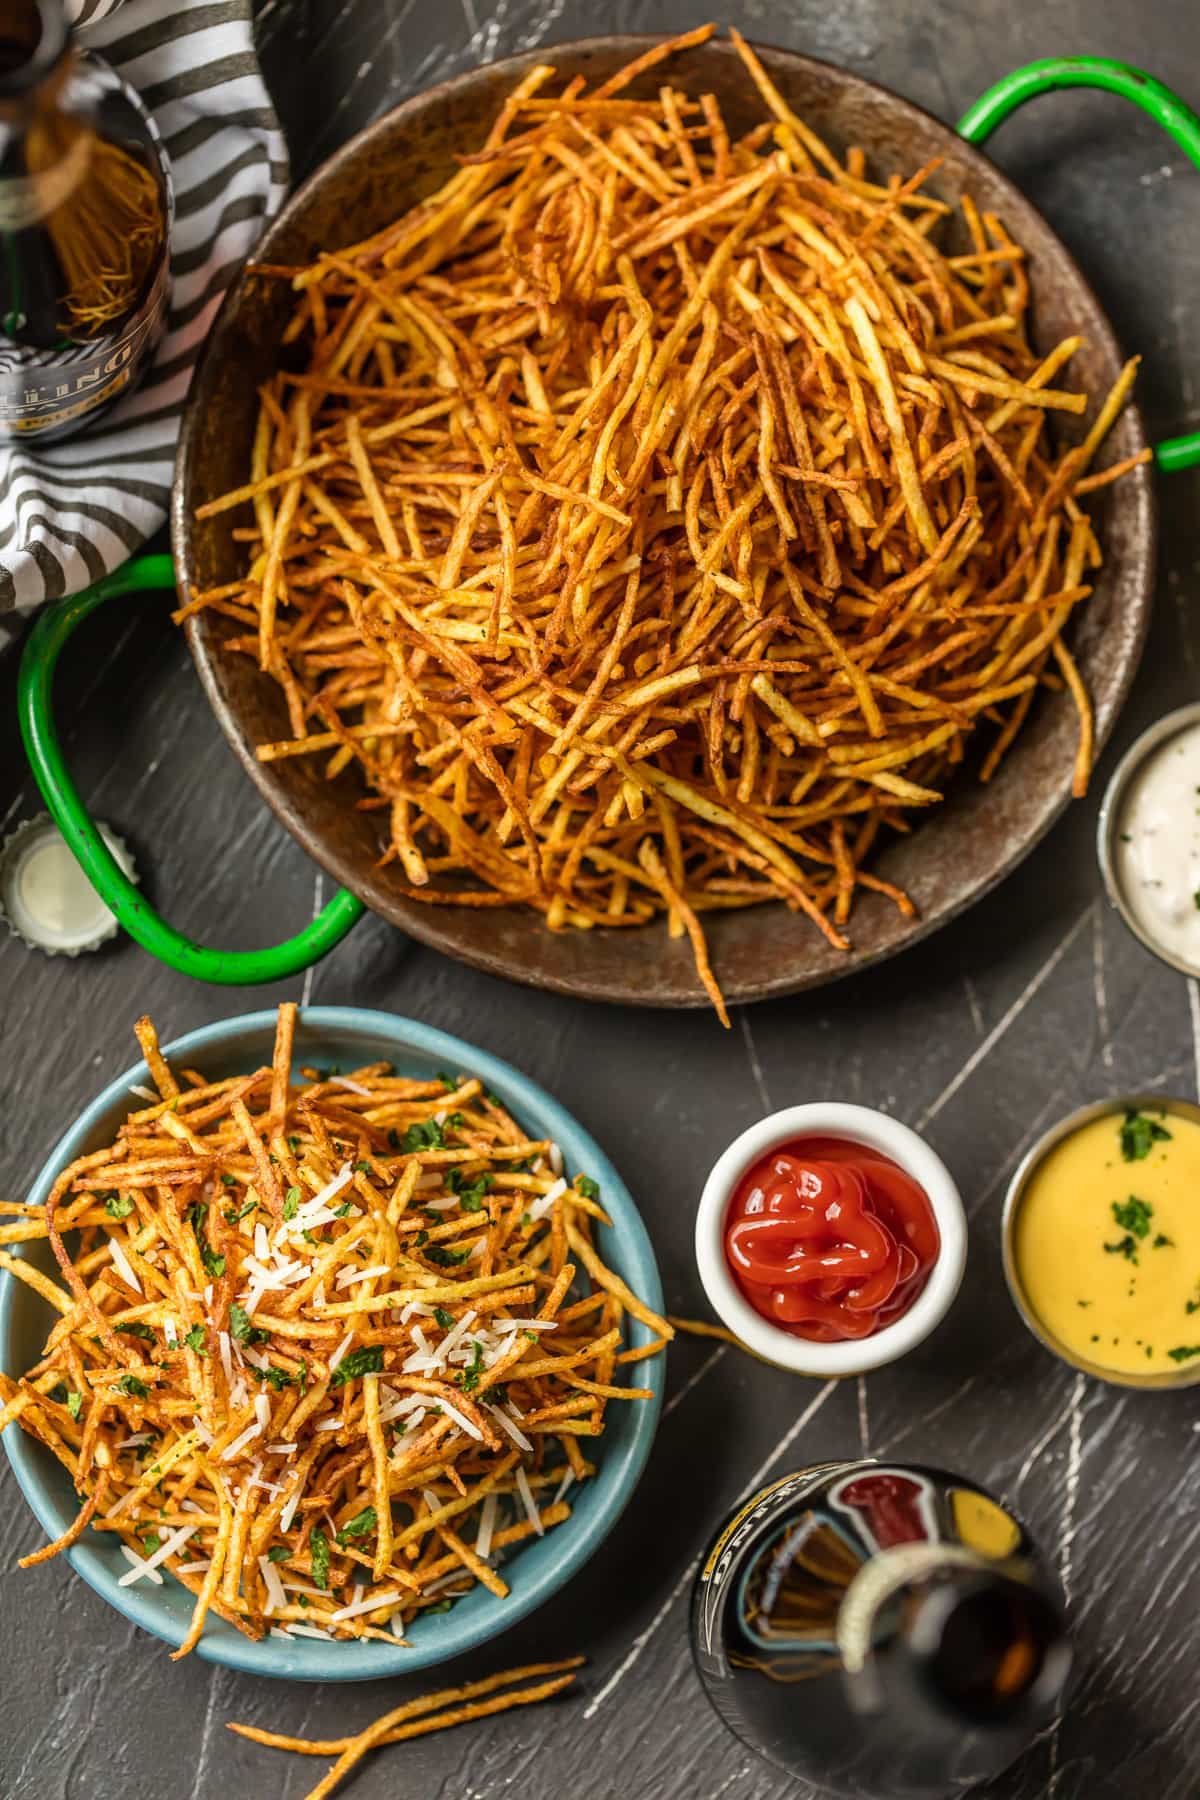 A large bowl of Shoestring Fries